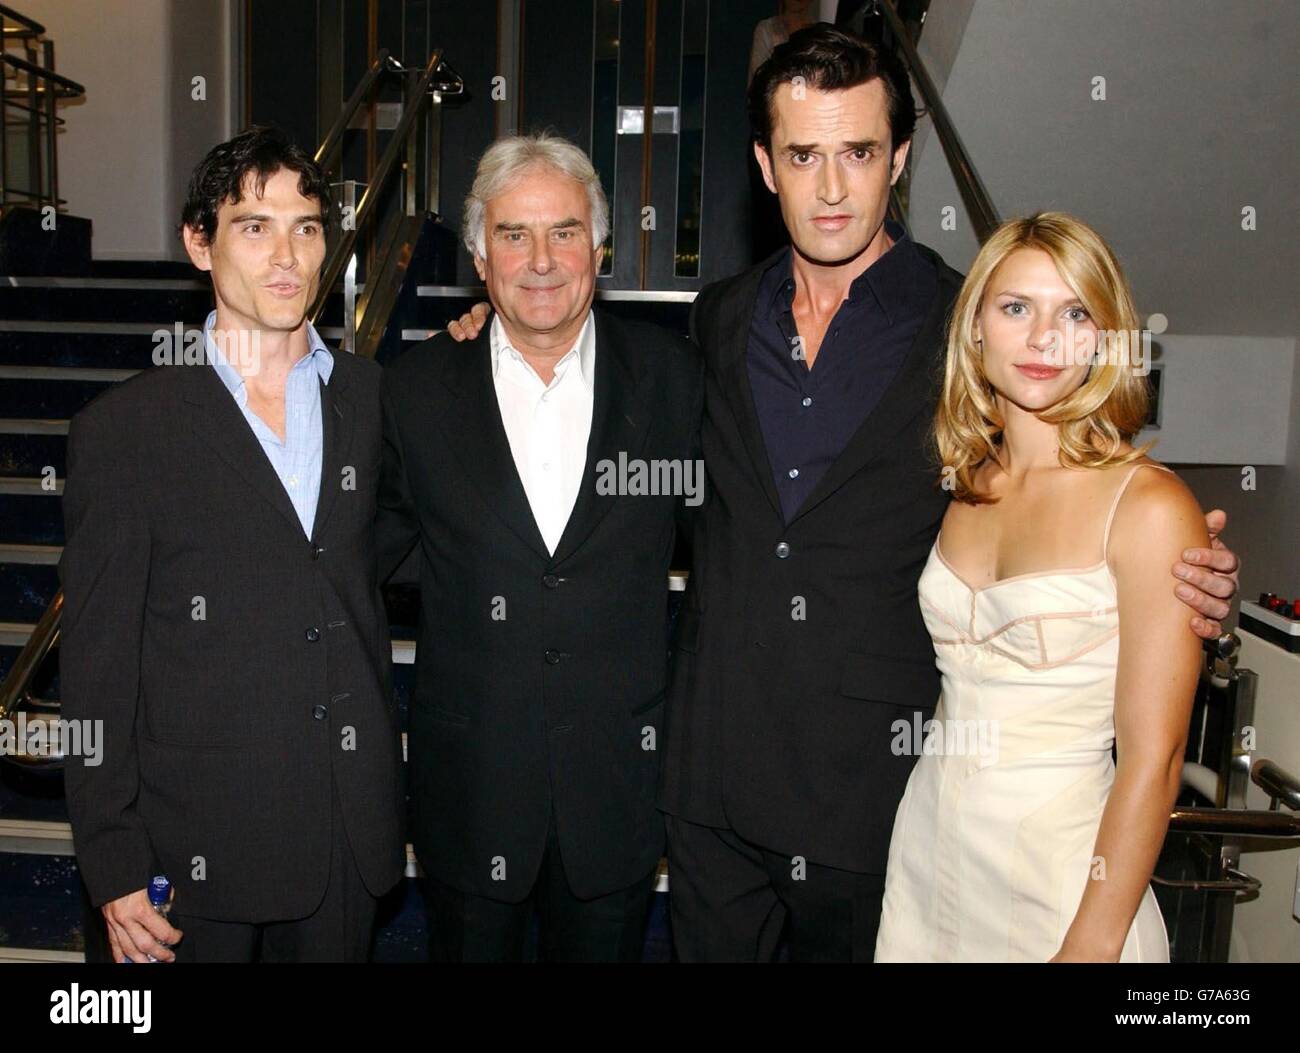 Director Richard Eyre (centre left) with stars of the film, Billy Crudup (far left), Rupert Everett and Claire Danes as they arrive for the London Charity premiere of Stage Beauty at the Odeon West End in central London in aid of The National Film and Television School. Stock Photo